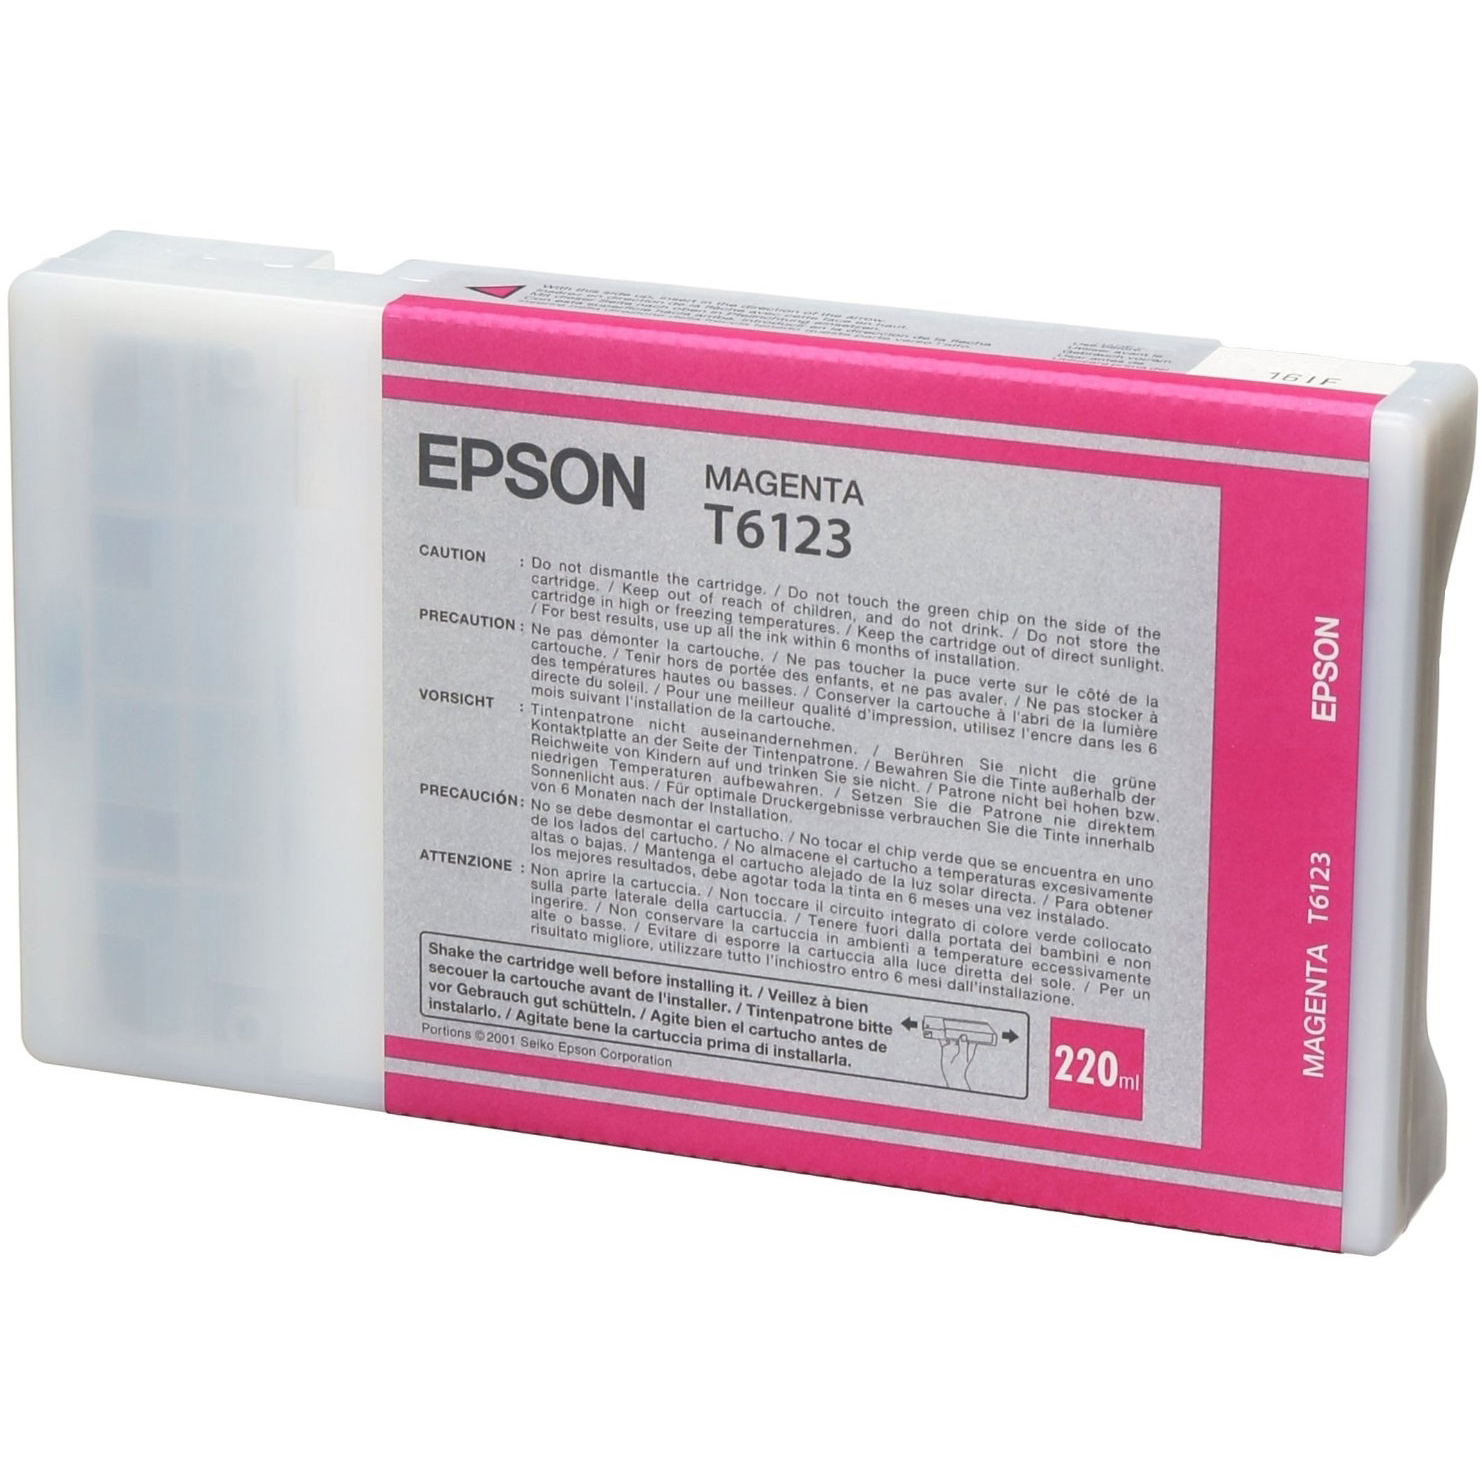 Compatible T612300/ C13T612300 Magenta high yield cartridge for Epson Stylus Pro 7450/ 9450